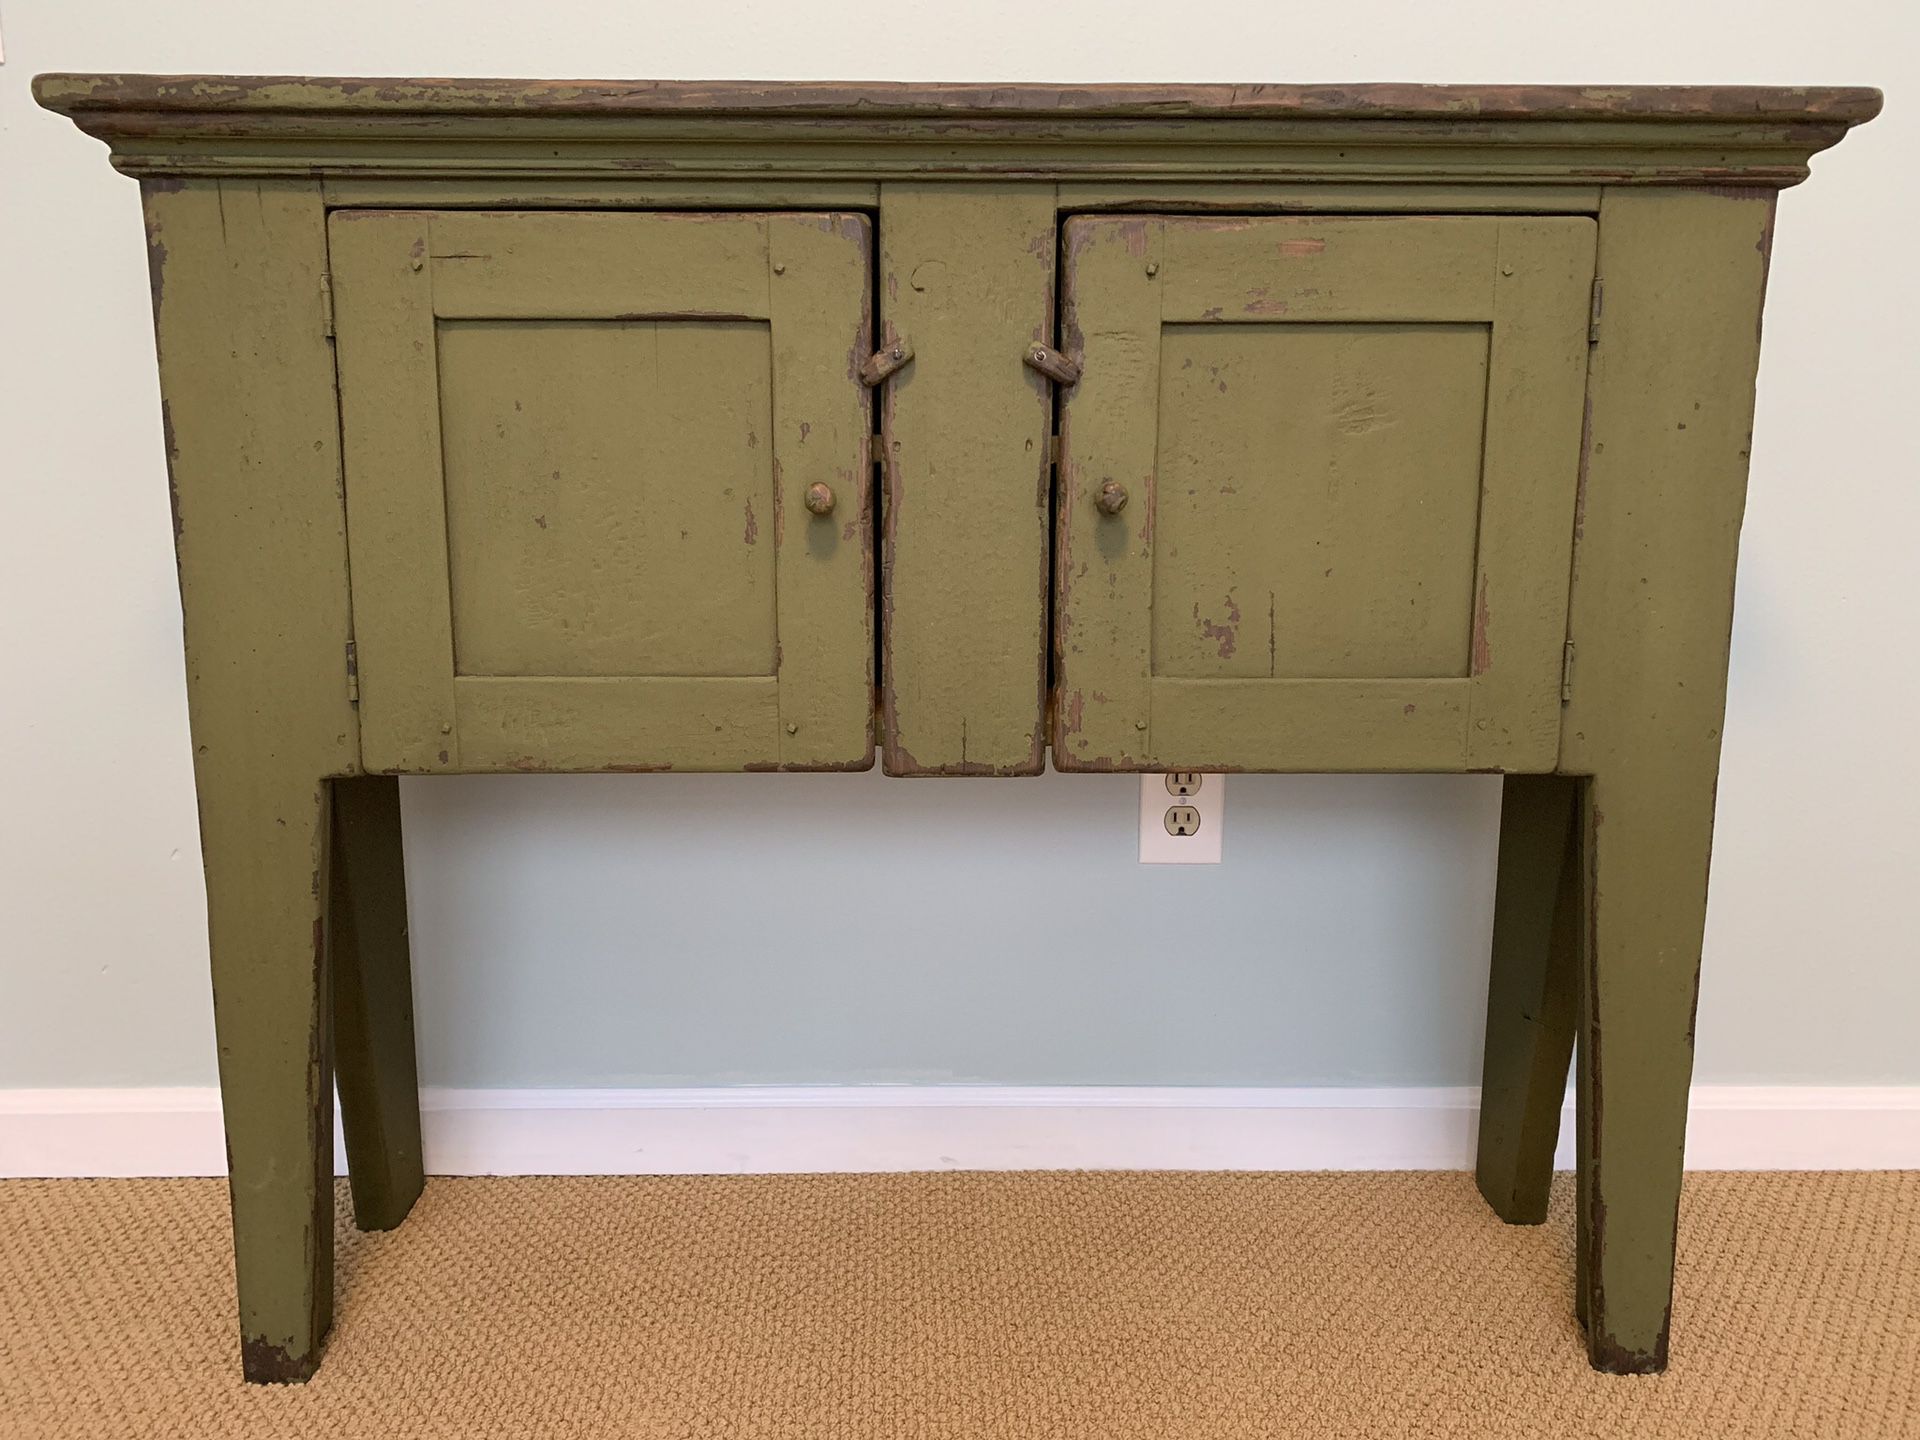 Cabinet/ Sideboard, American Made Antique Reproduction Furniture